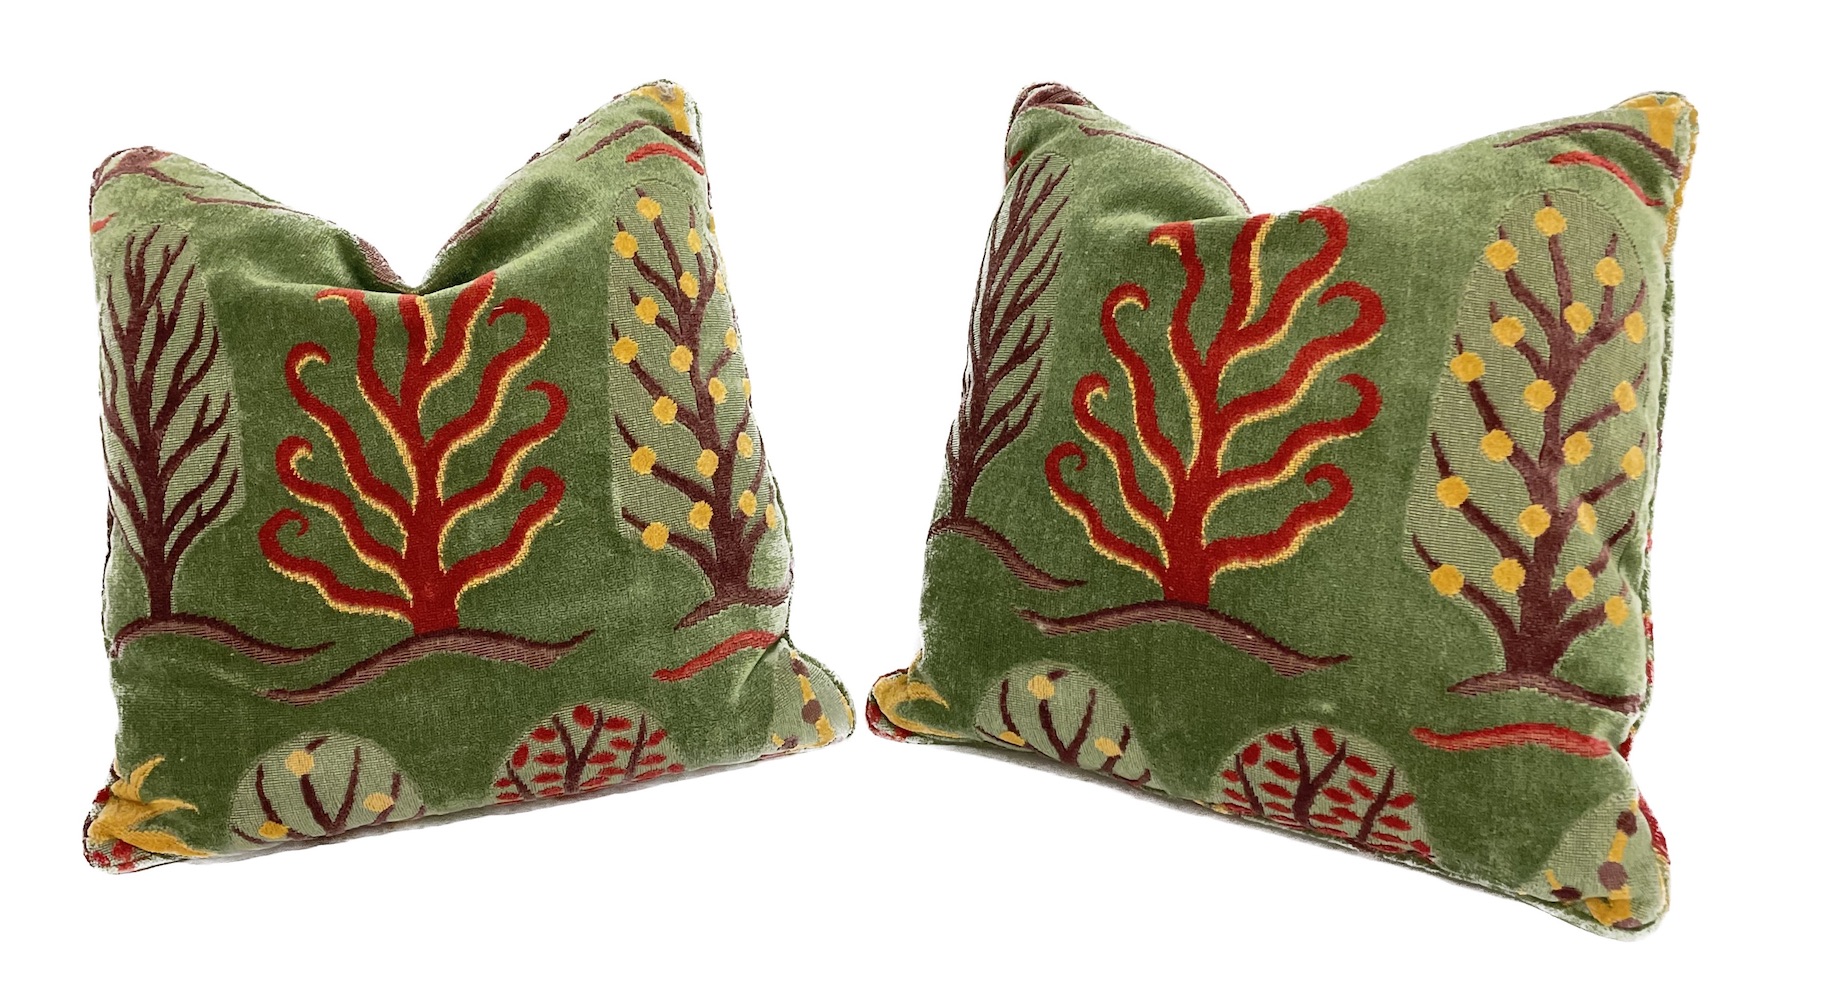 Clarence HouseCoral Velvet Pillows, Pair~P77681980